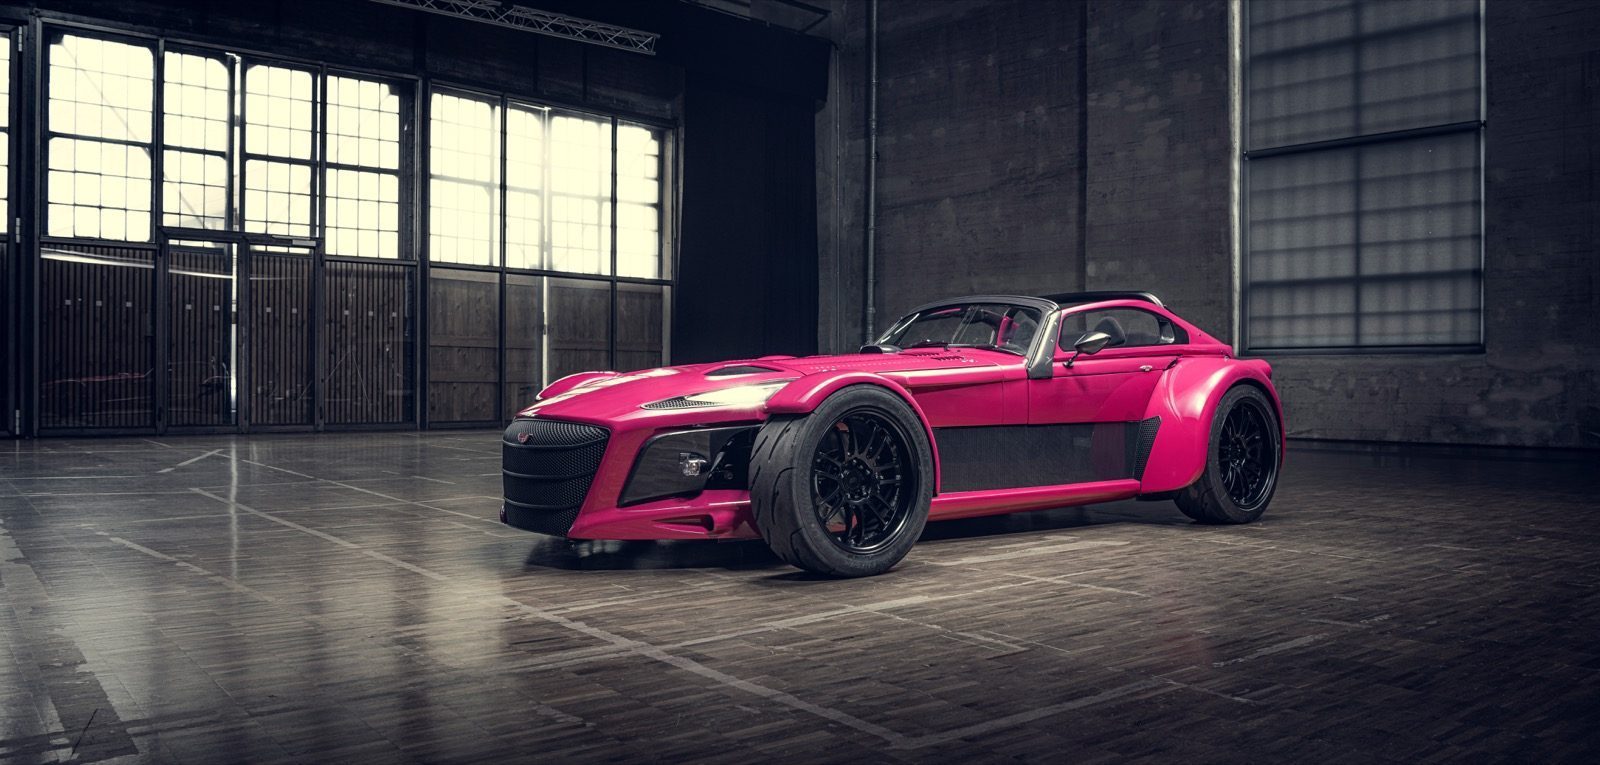 Donkervoort D8 GTO Individual